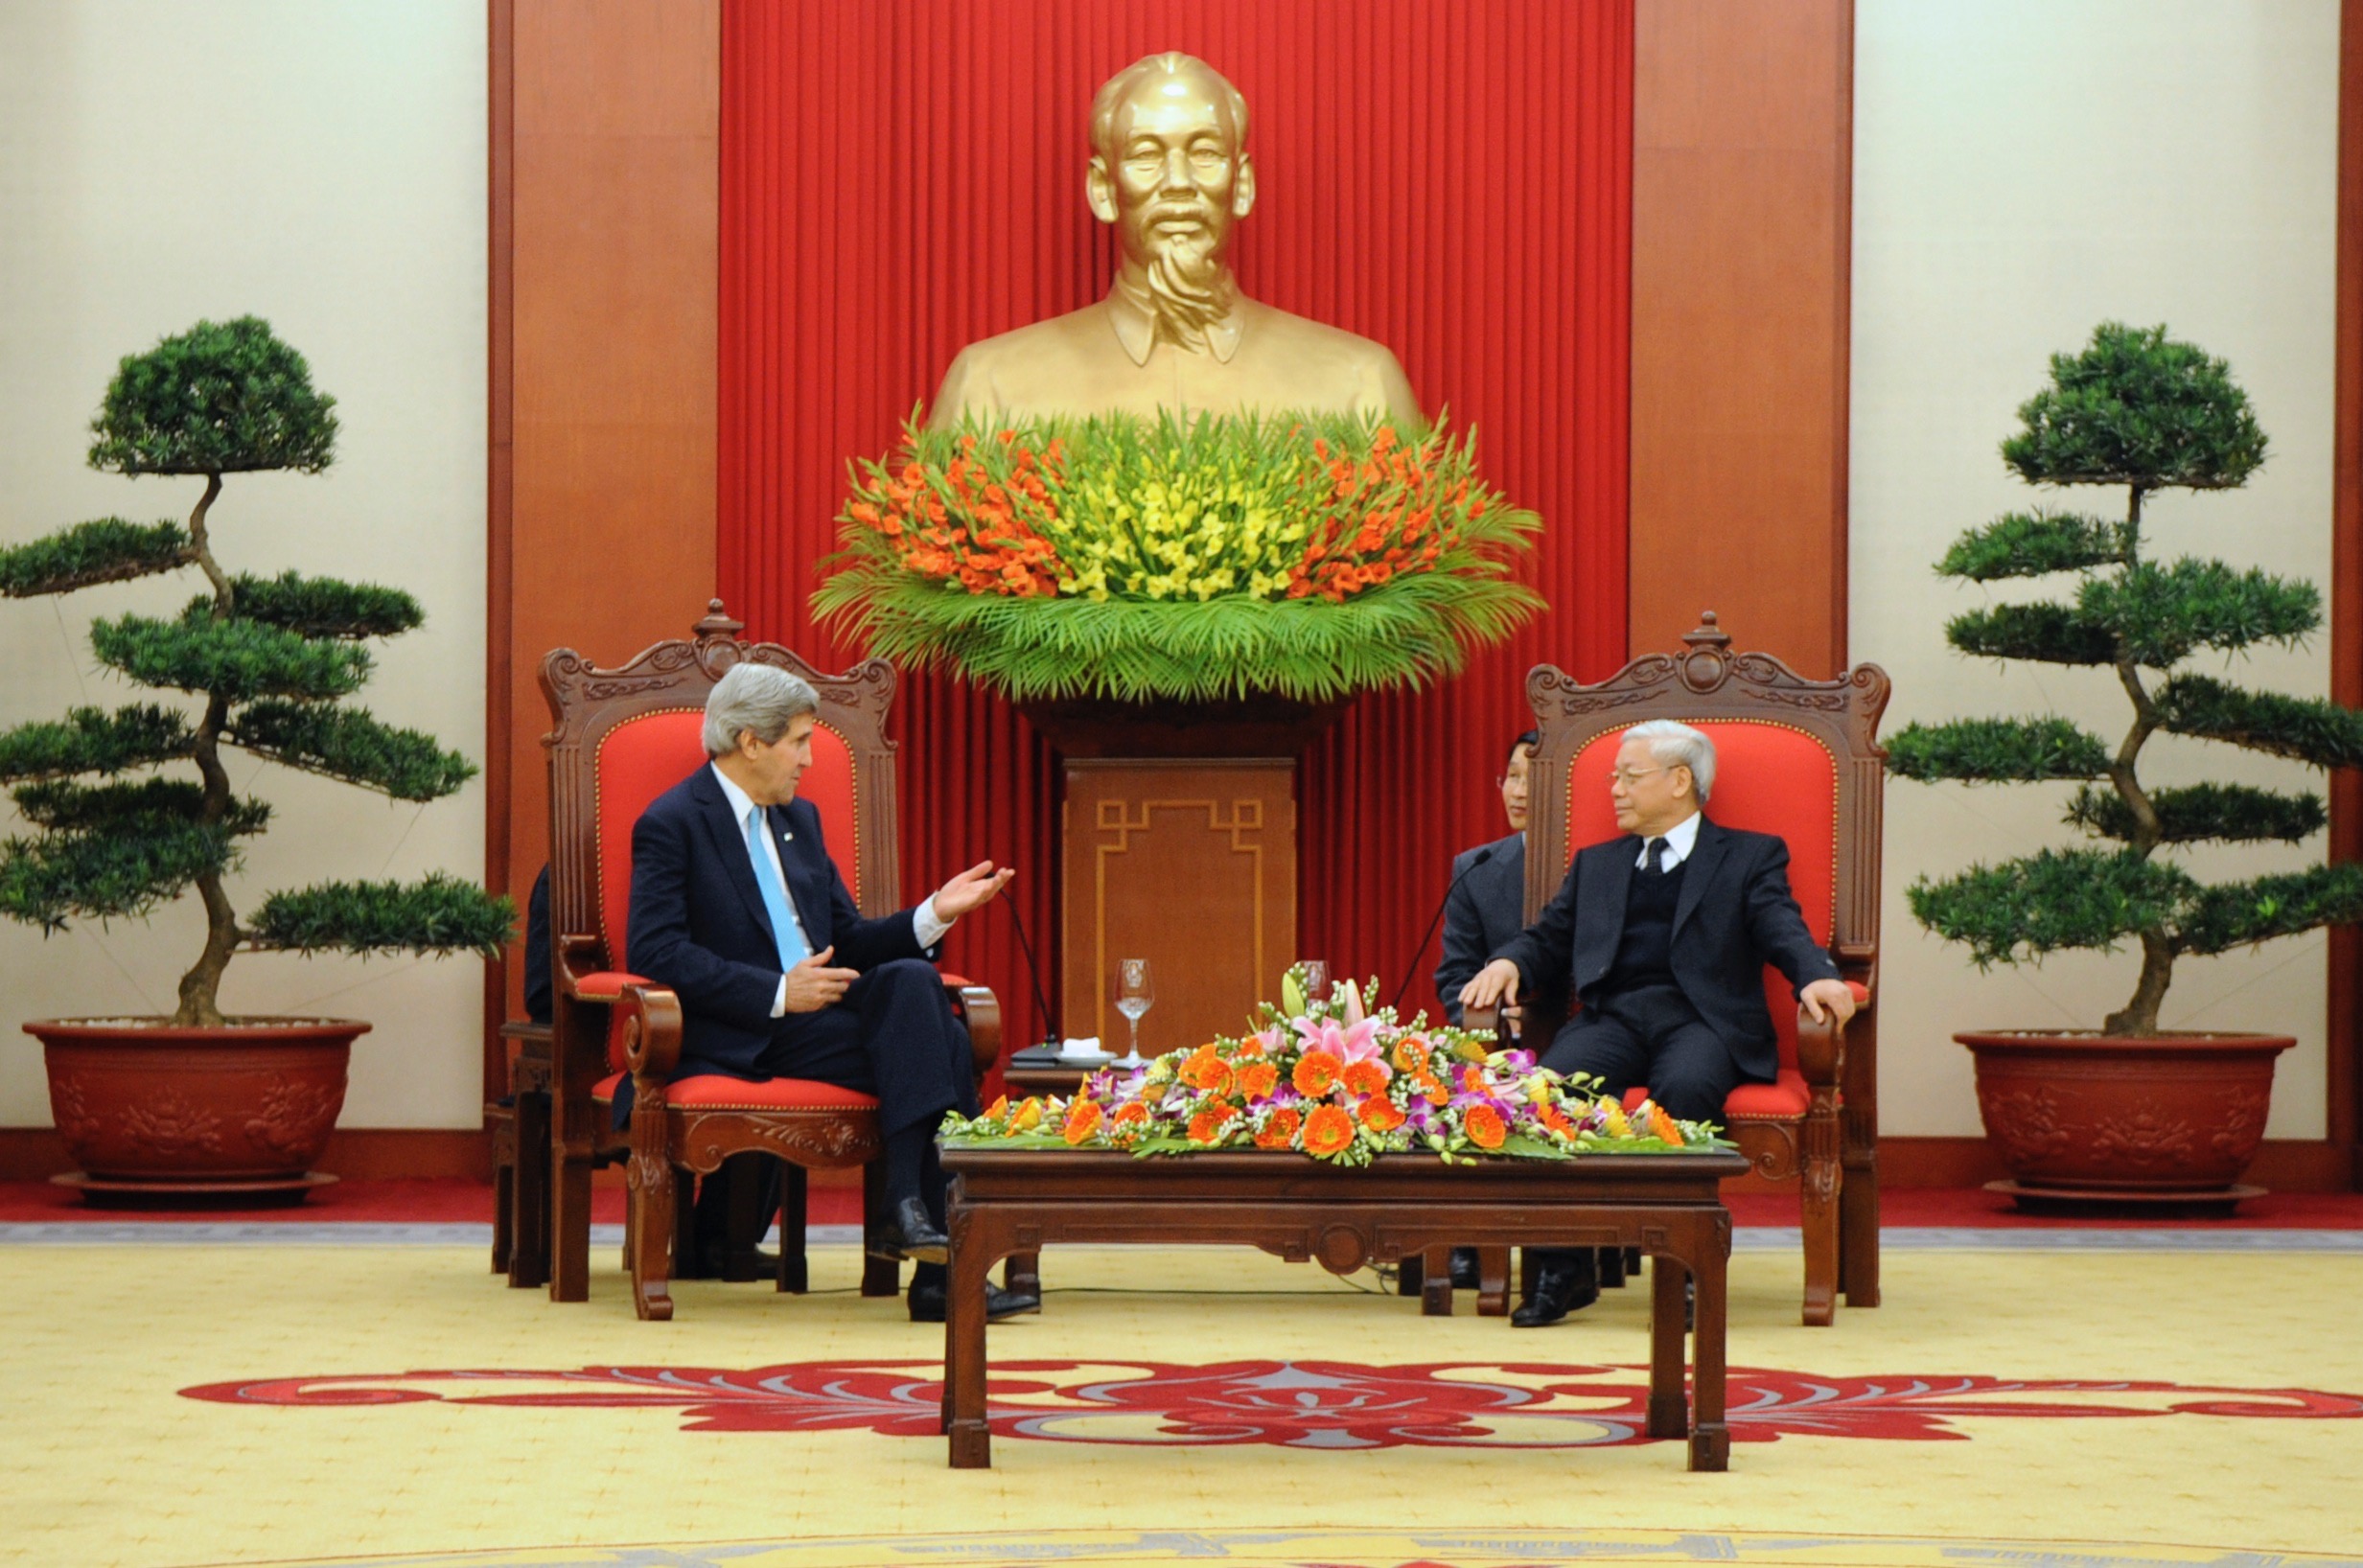  A typical government meeting in the shadow of Ho Chi Minh. 